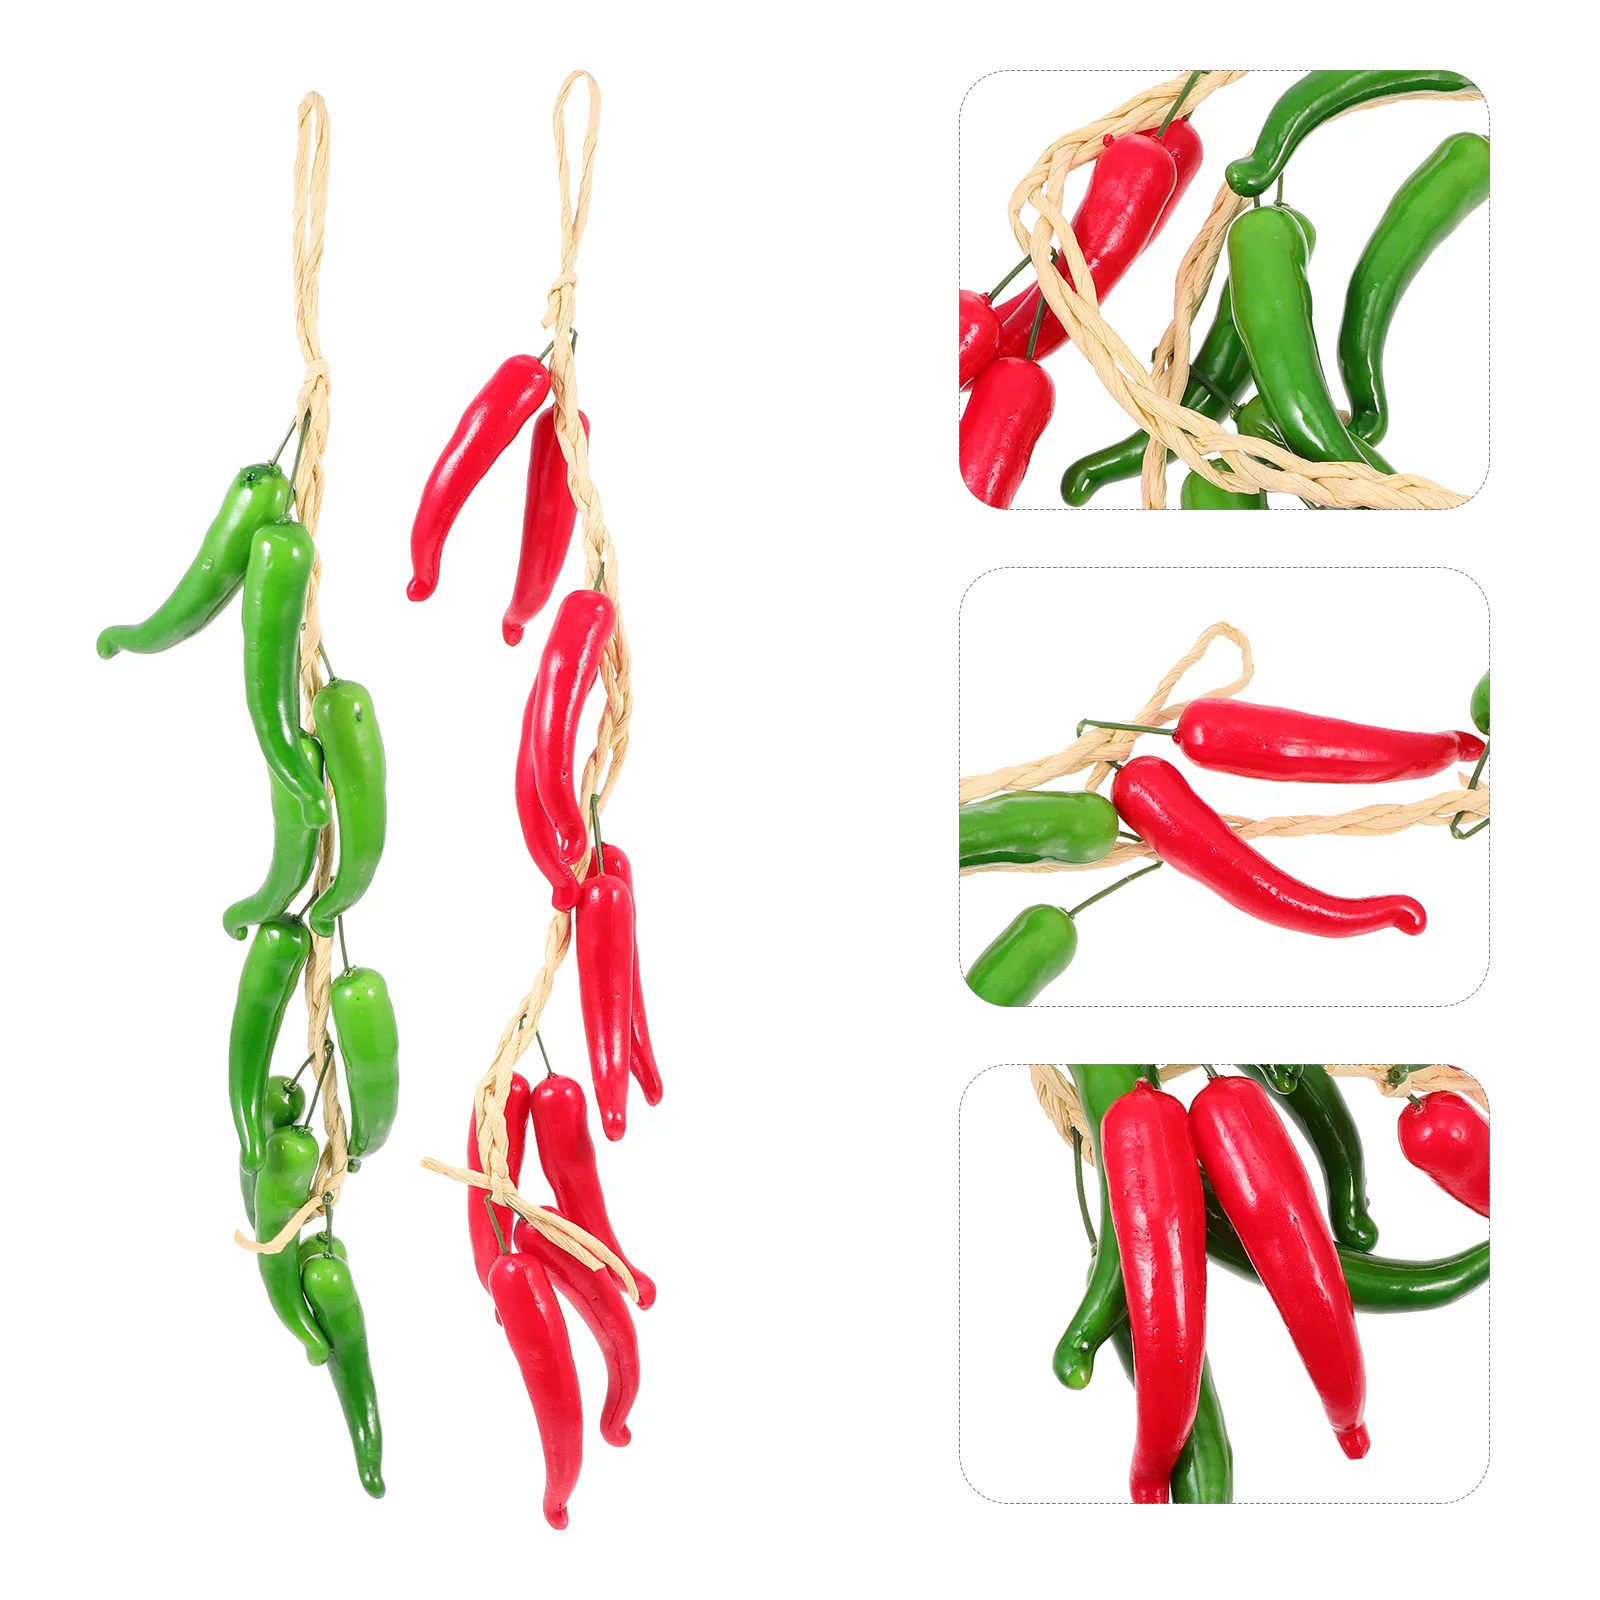 

Pepper Artificial Chili Fake Vegetable Hanging String Red Peppers Lifelike Decor Strings Hot Fruit Garland Ornament Toy